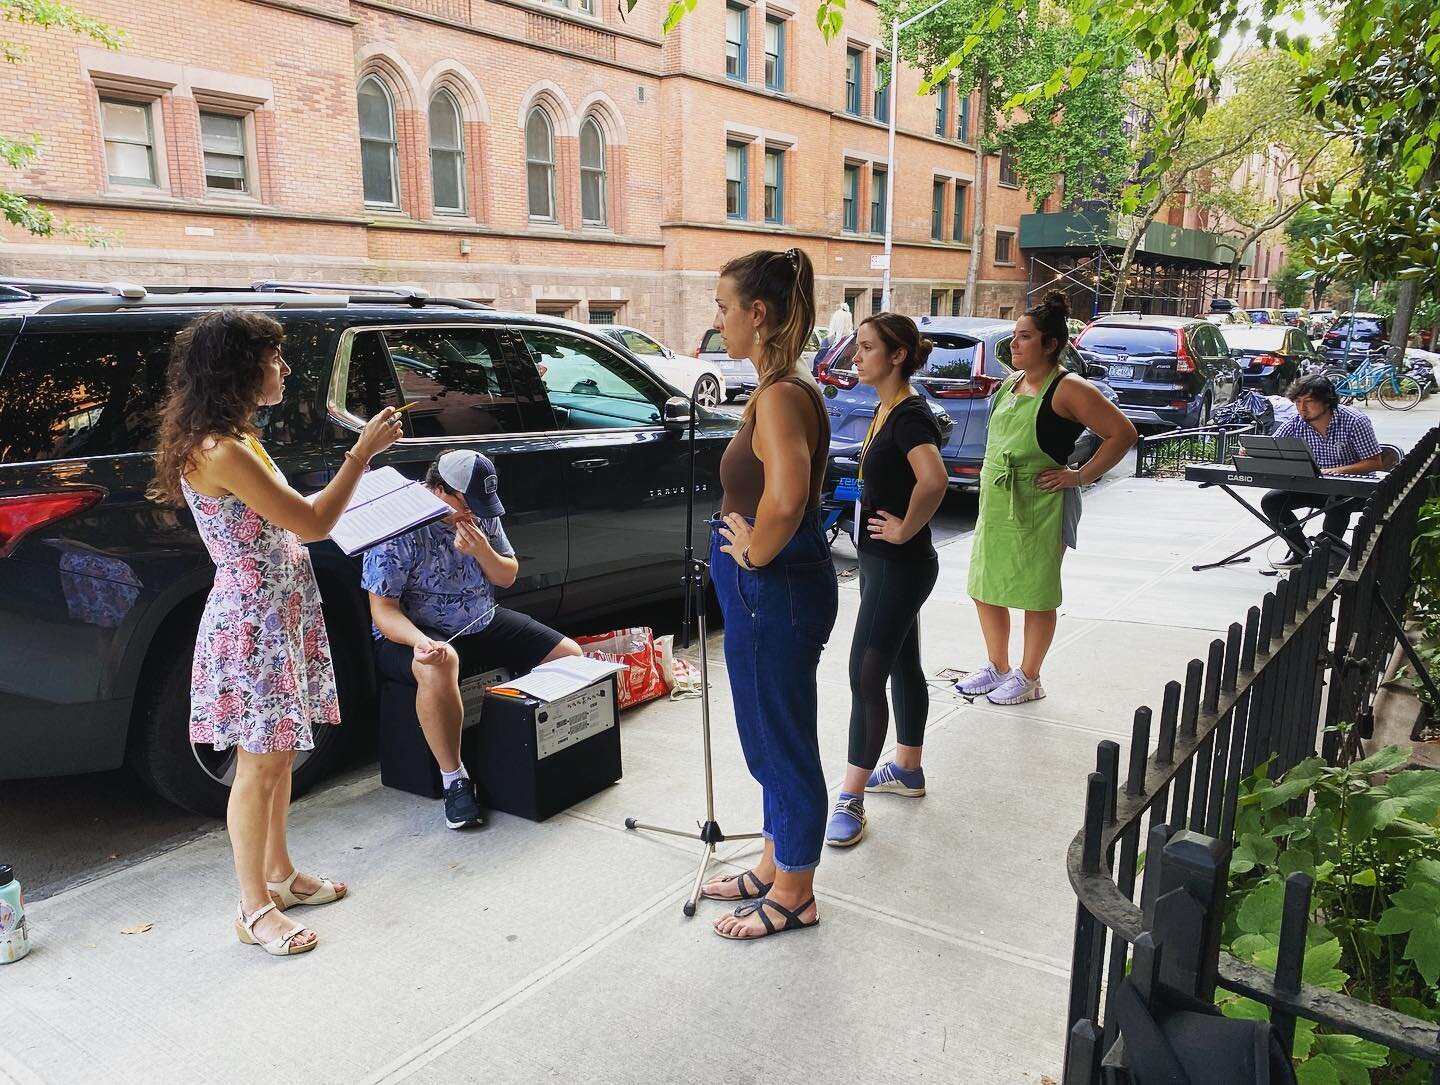 Happy Monday, neighbors! ☕️

Photo dump of last week&rsquo;s staging rehearsals at both locations in Manhattan and Brooklyn&hellip;it&rsquo;s looking great!!!

Will you join us in our upcoming September performances? Do not miss Menotti&rsquo;s The O